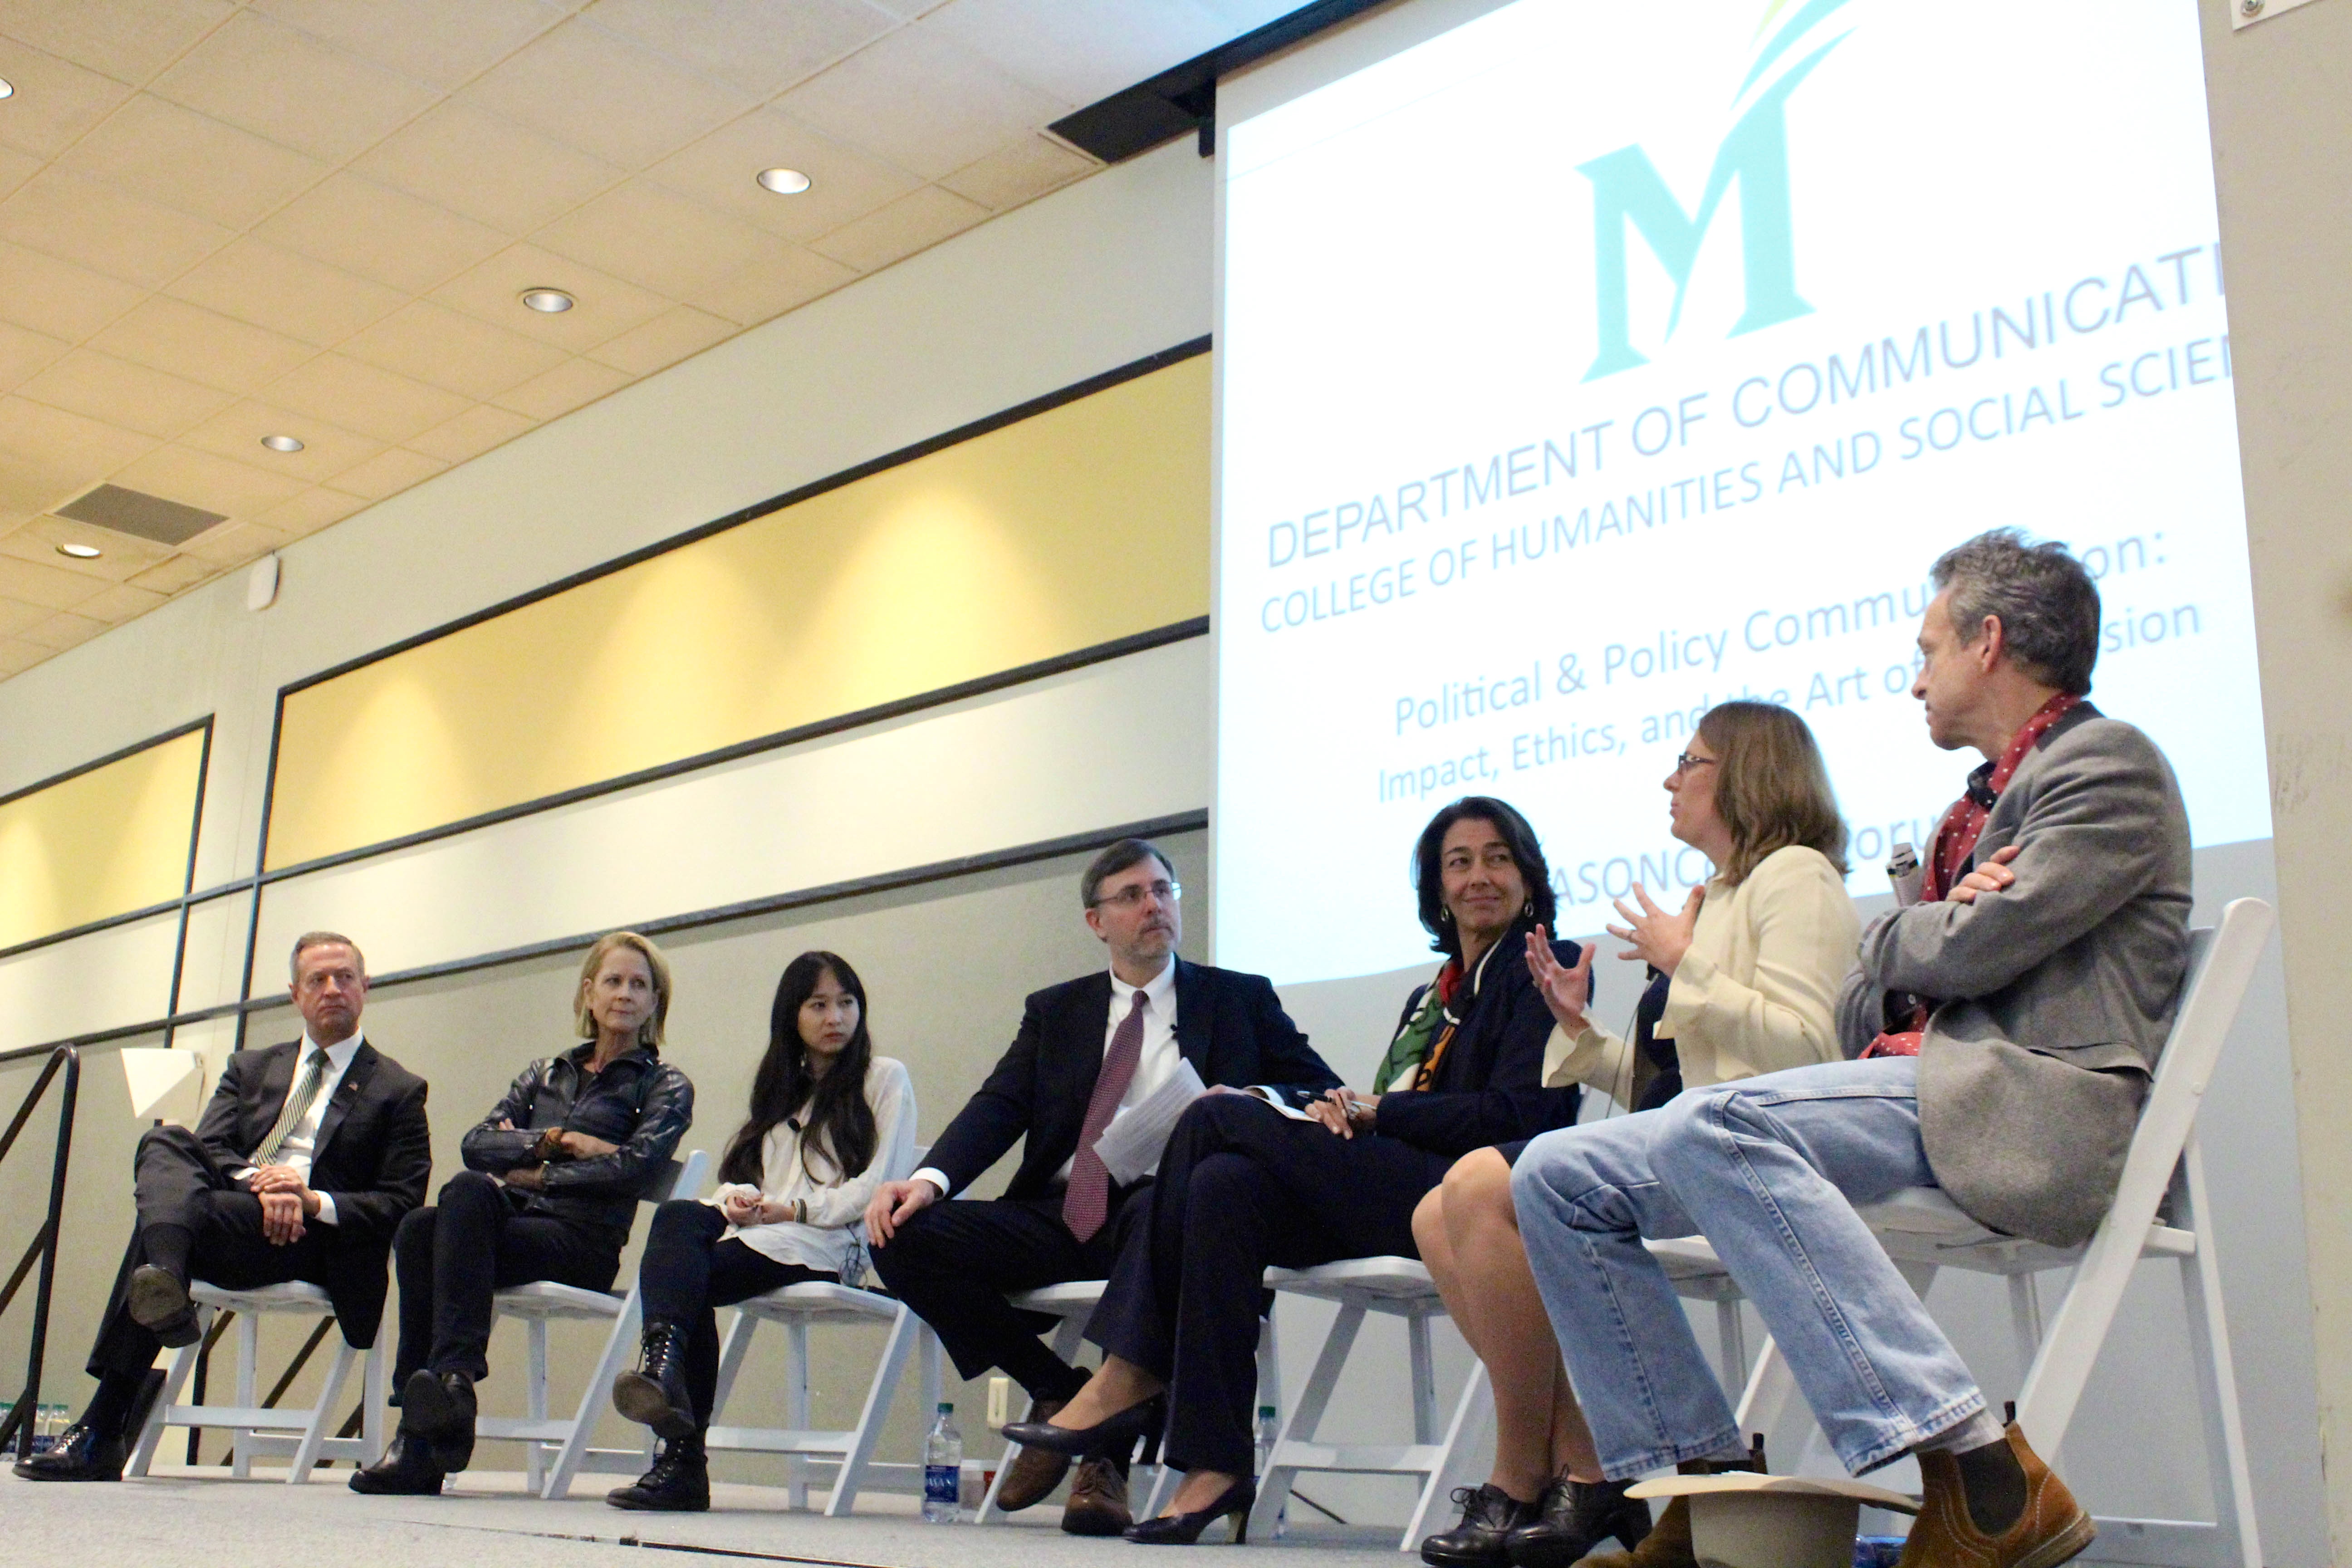 2016 Communication Industry Forum panelists speaking at George Mason's Communication Industry Forum on Tuesday, October 25th. Photo Credit Mimi Albano 